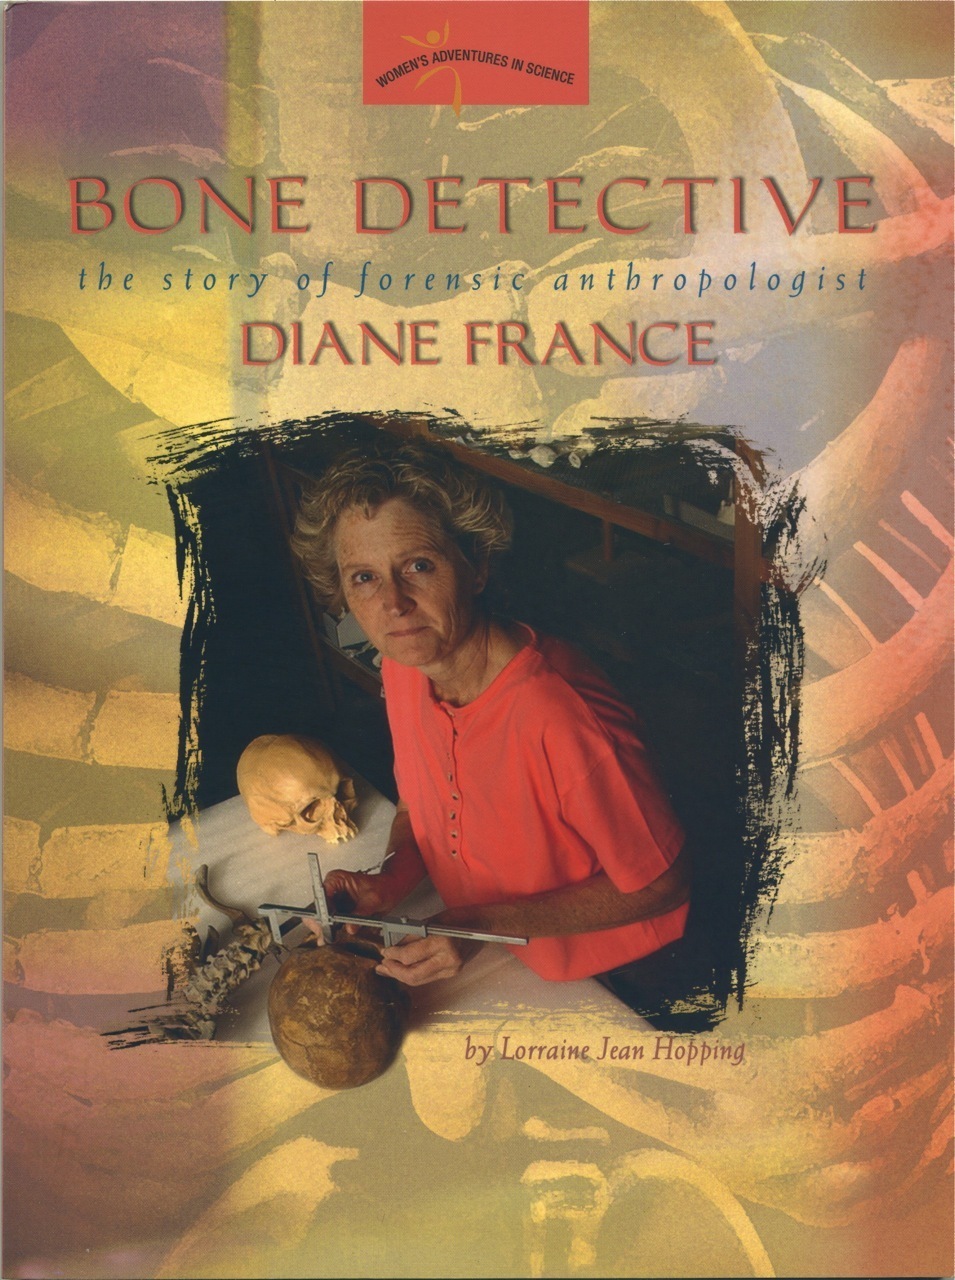 For more forensic science, check out my biography of Diane France.